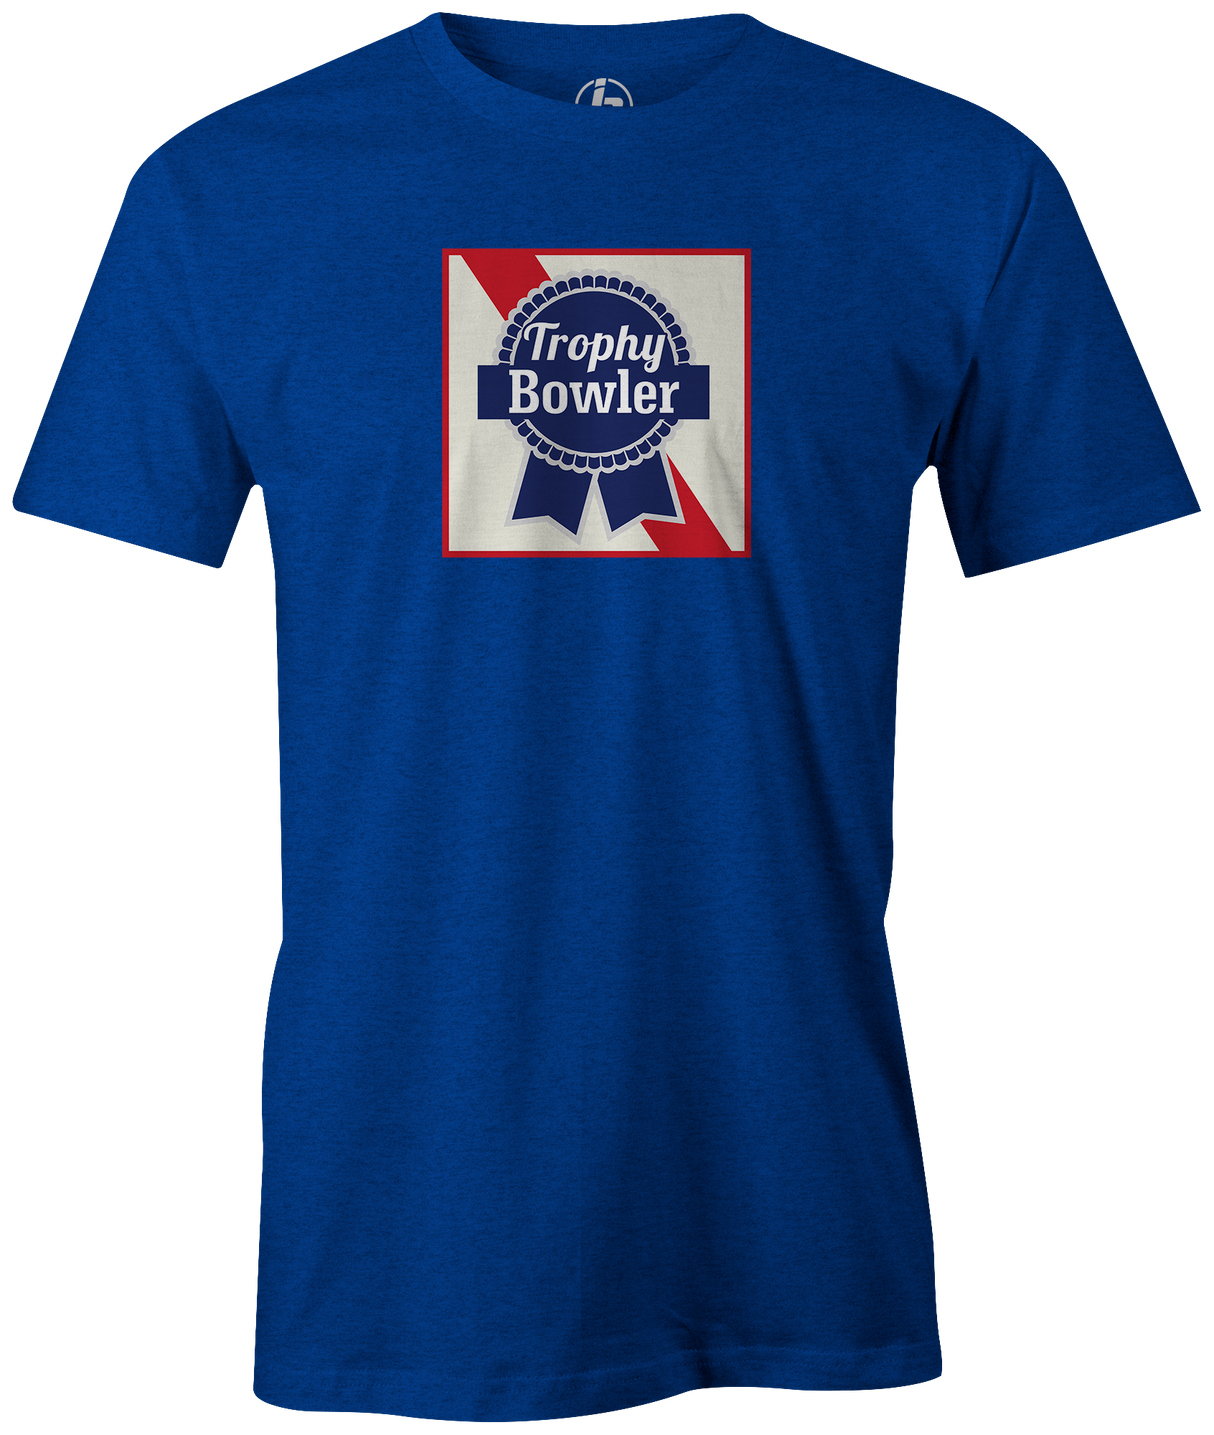 Some people go to league to bowl. Others go to have some beers. But why not do both and be the perfect Trophy Bowler! Pabst Blue Ribbon beer Show your love for drinkin' beers and throwing strikes in this awesome Beer League bowling tee. Discount, cheap, free shipping, coupon code, tee, tee-shirt, t-shirt, apparel, league bowling team shirt, cool